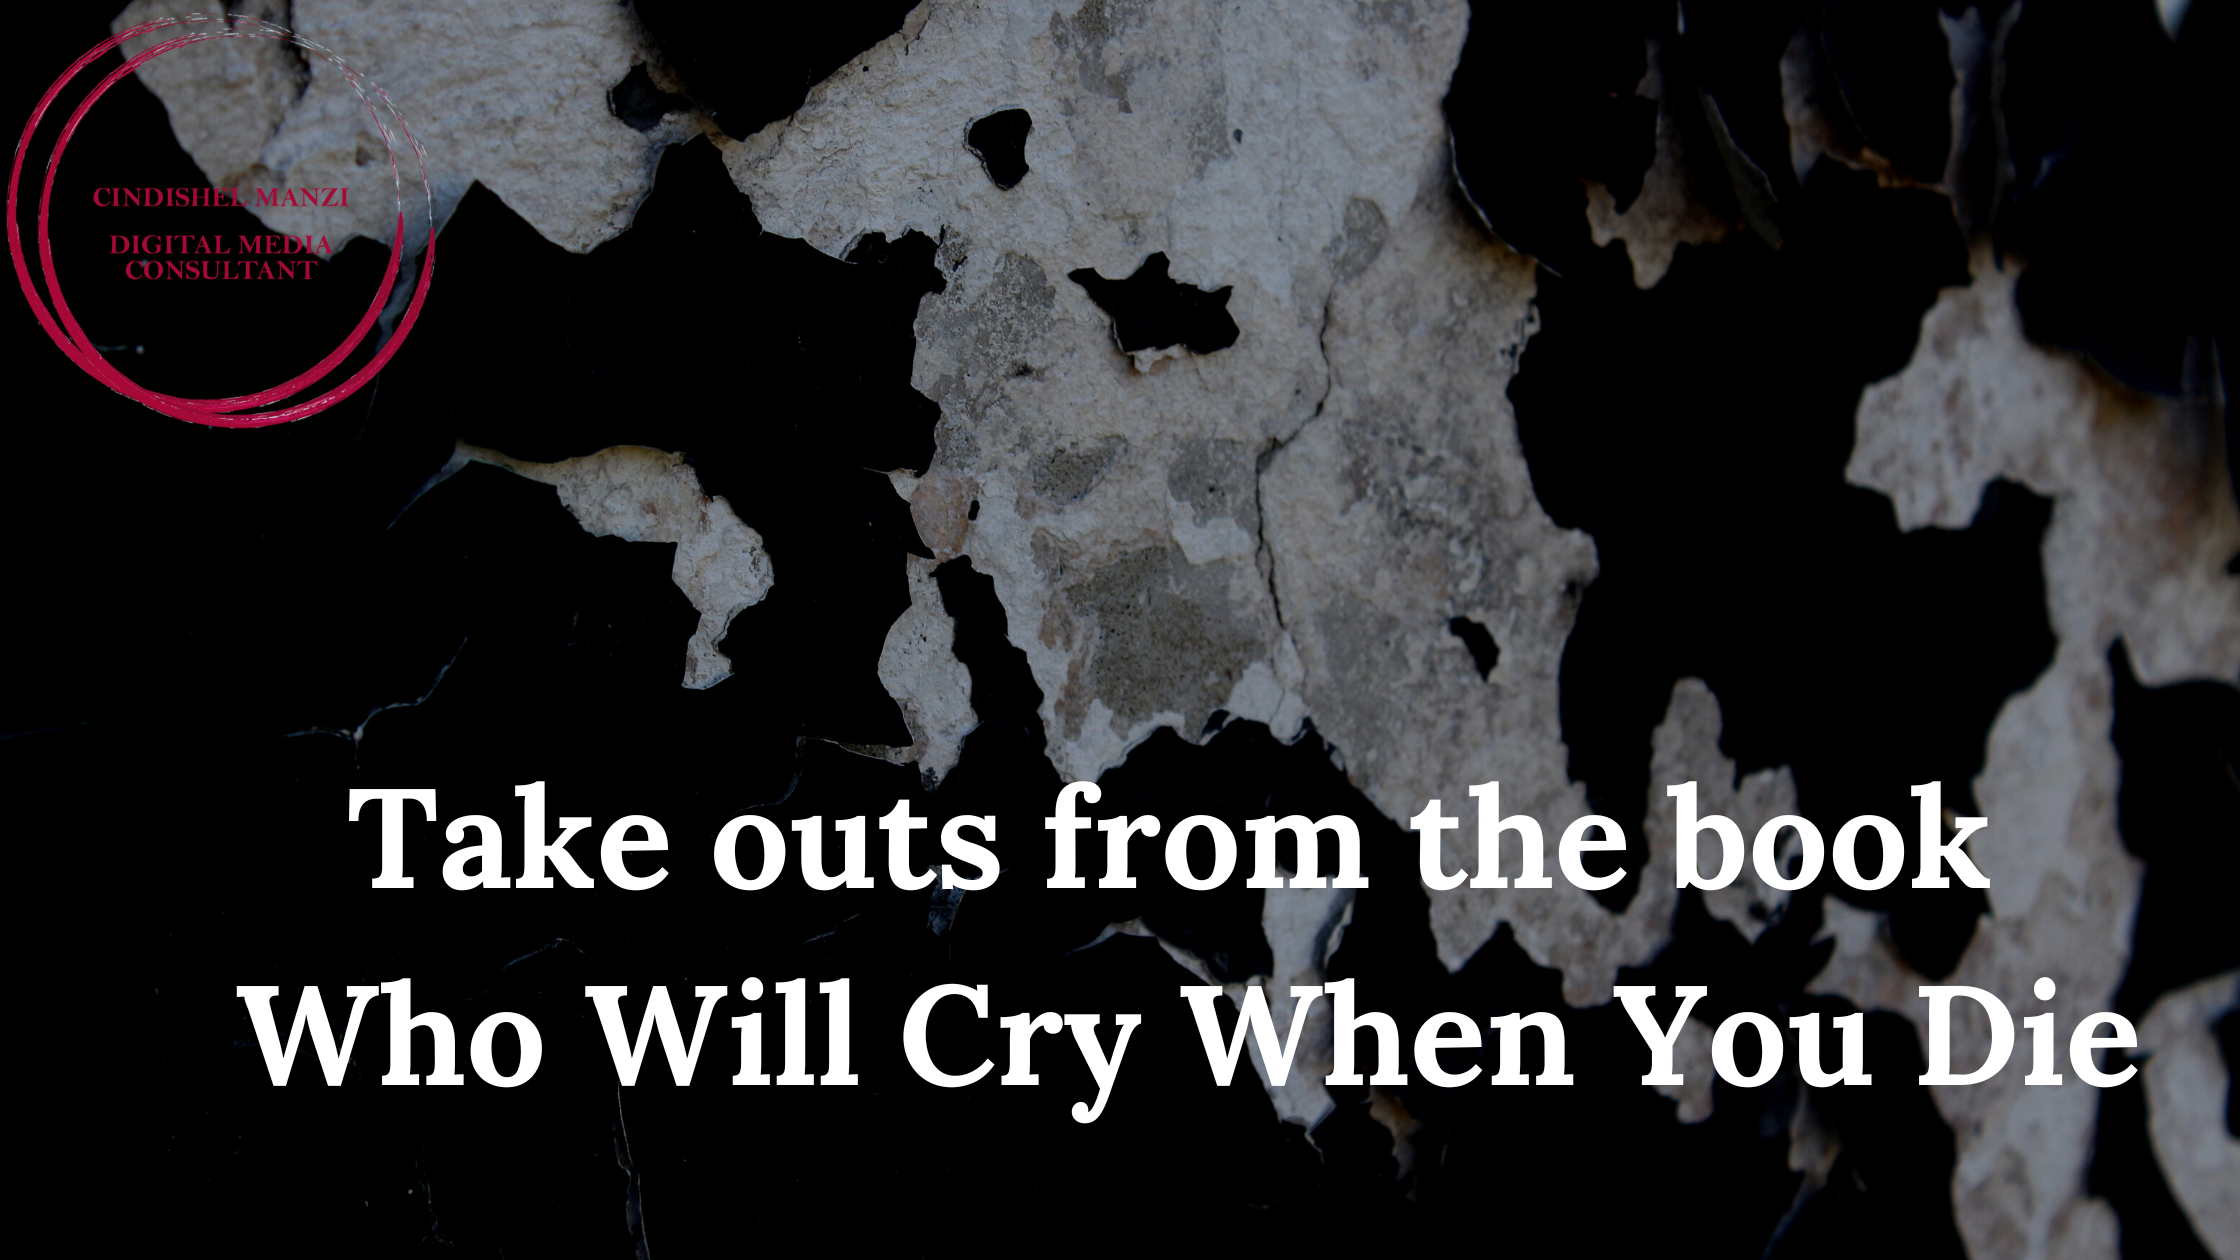 Takeouts from the book ‘Who will cry when I die’